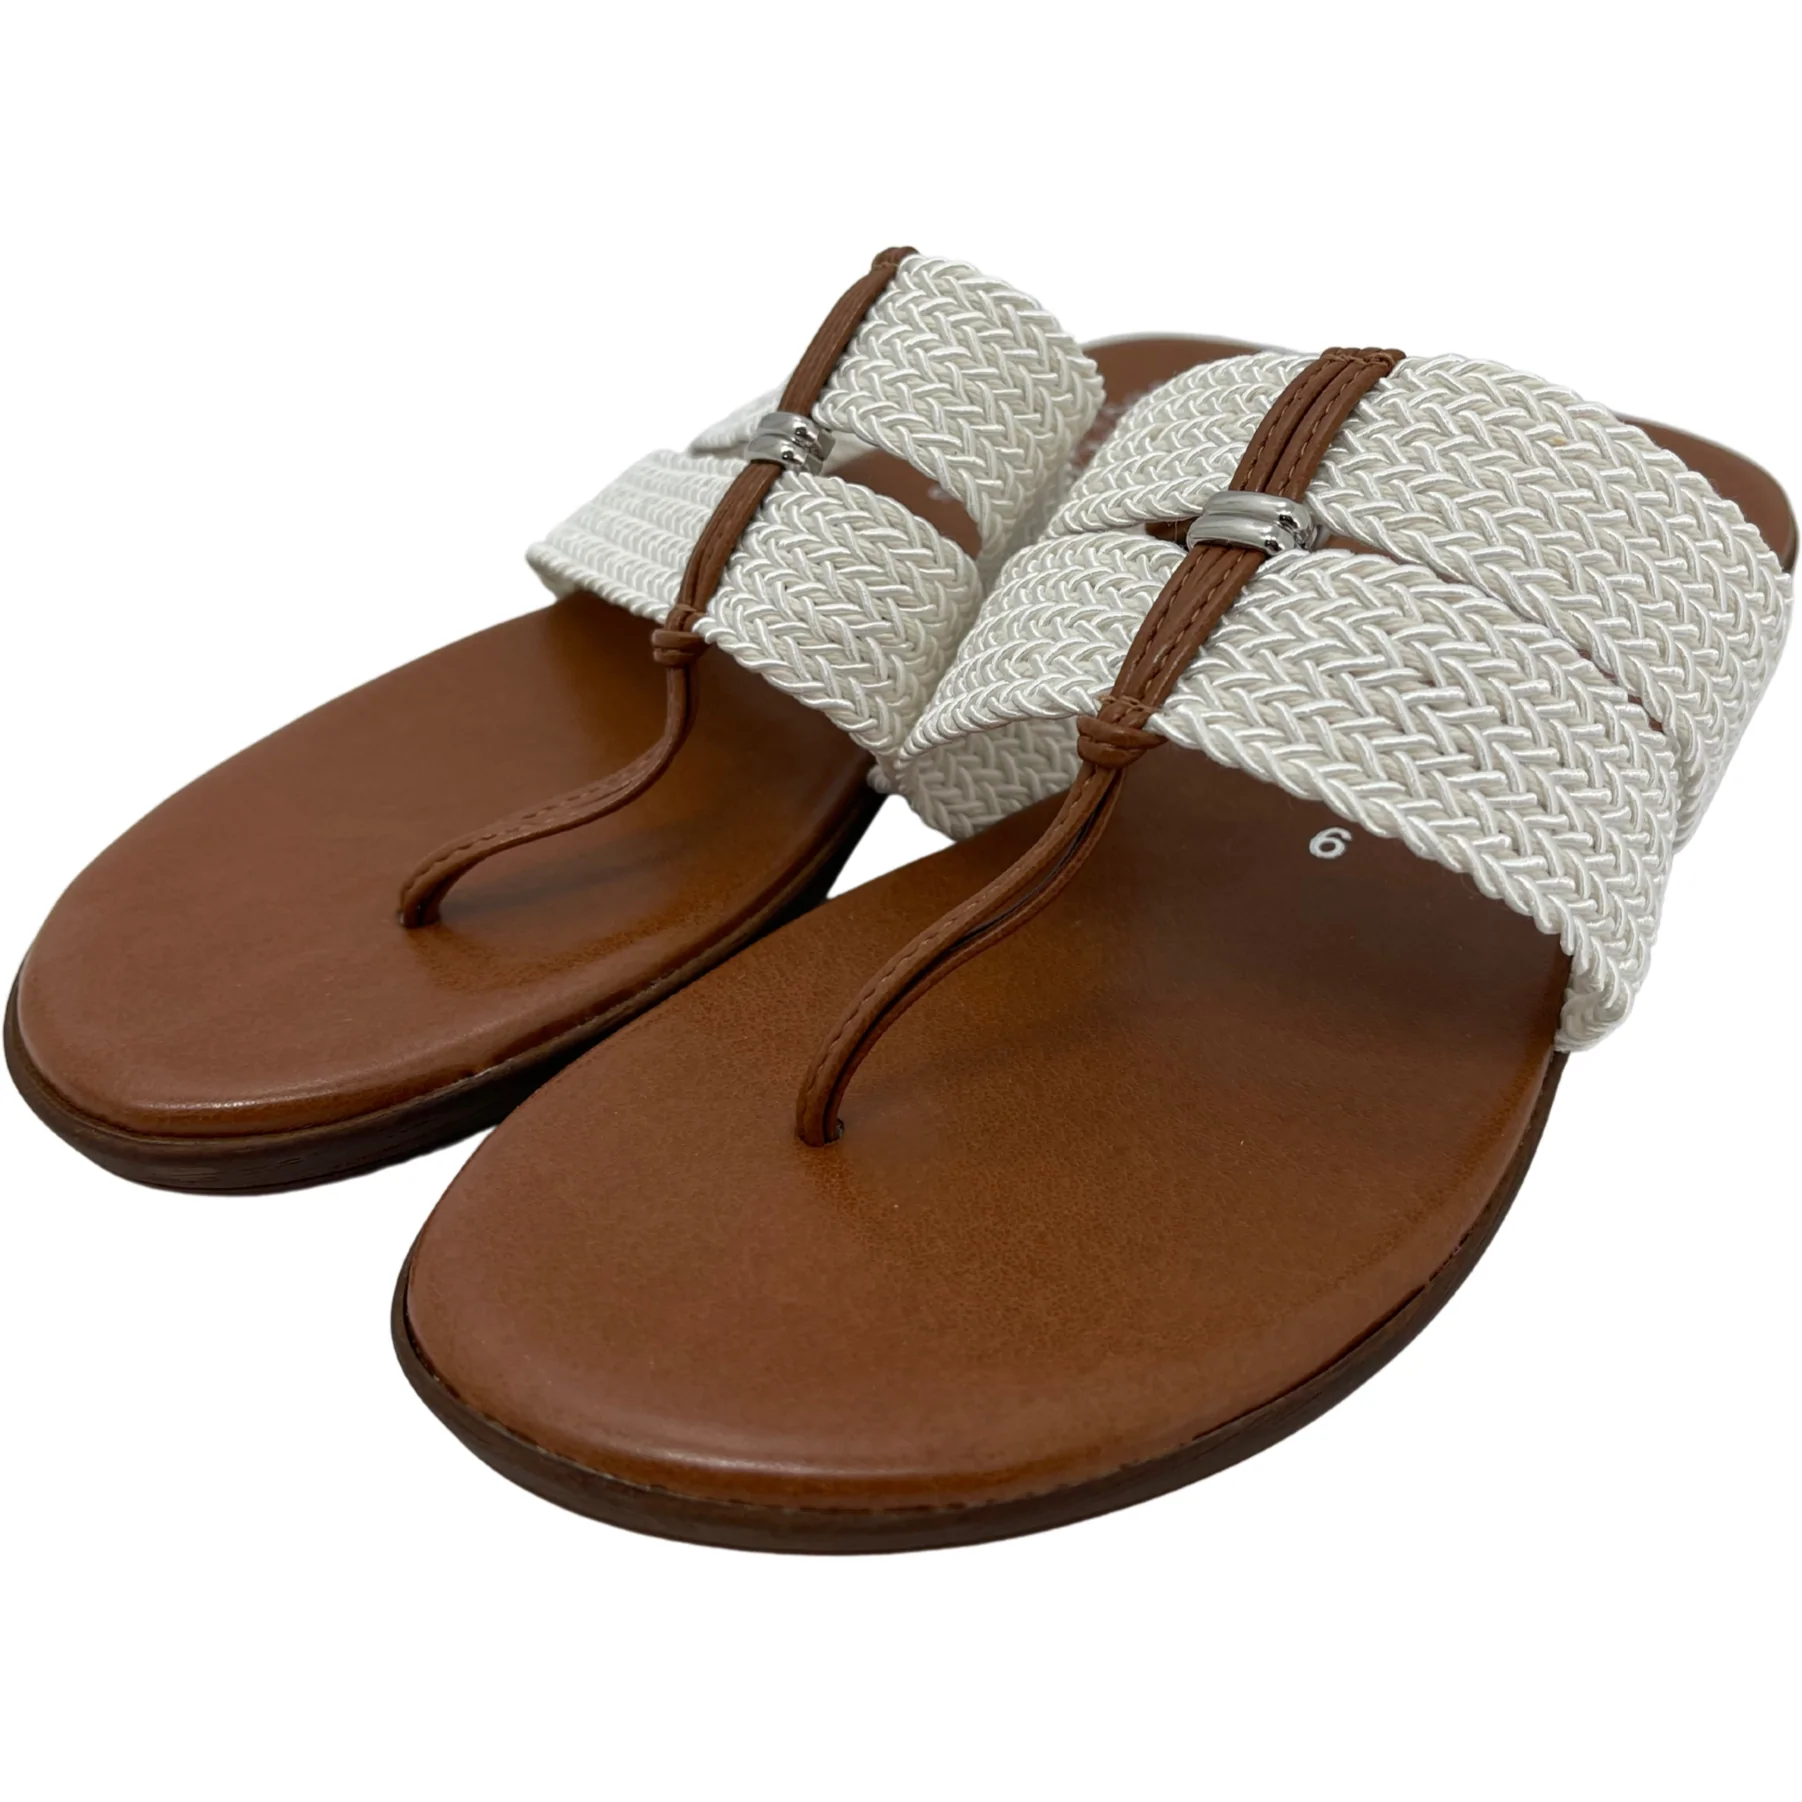 Stoney Clover Lane White Sandals Size 6 - $26 - From MamaBears